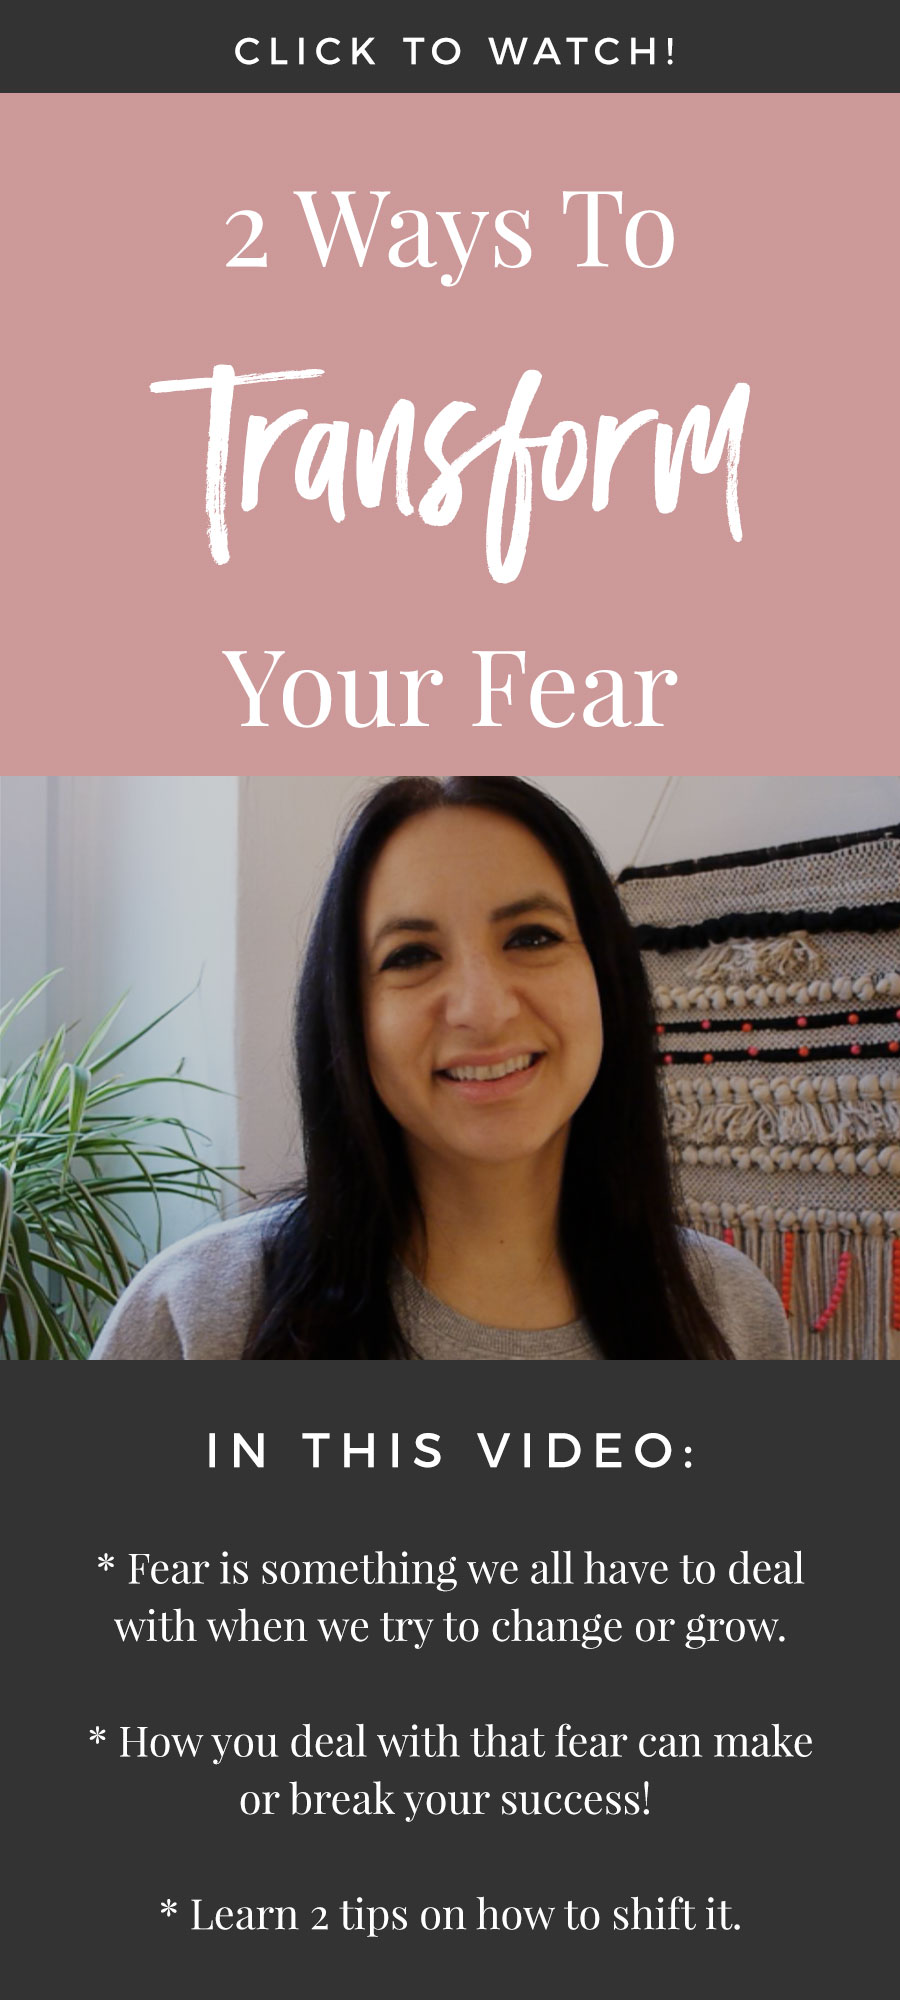 2 Ways To Transform Your Fear